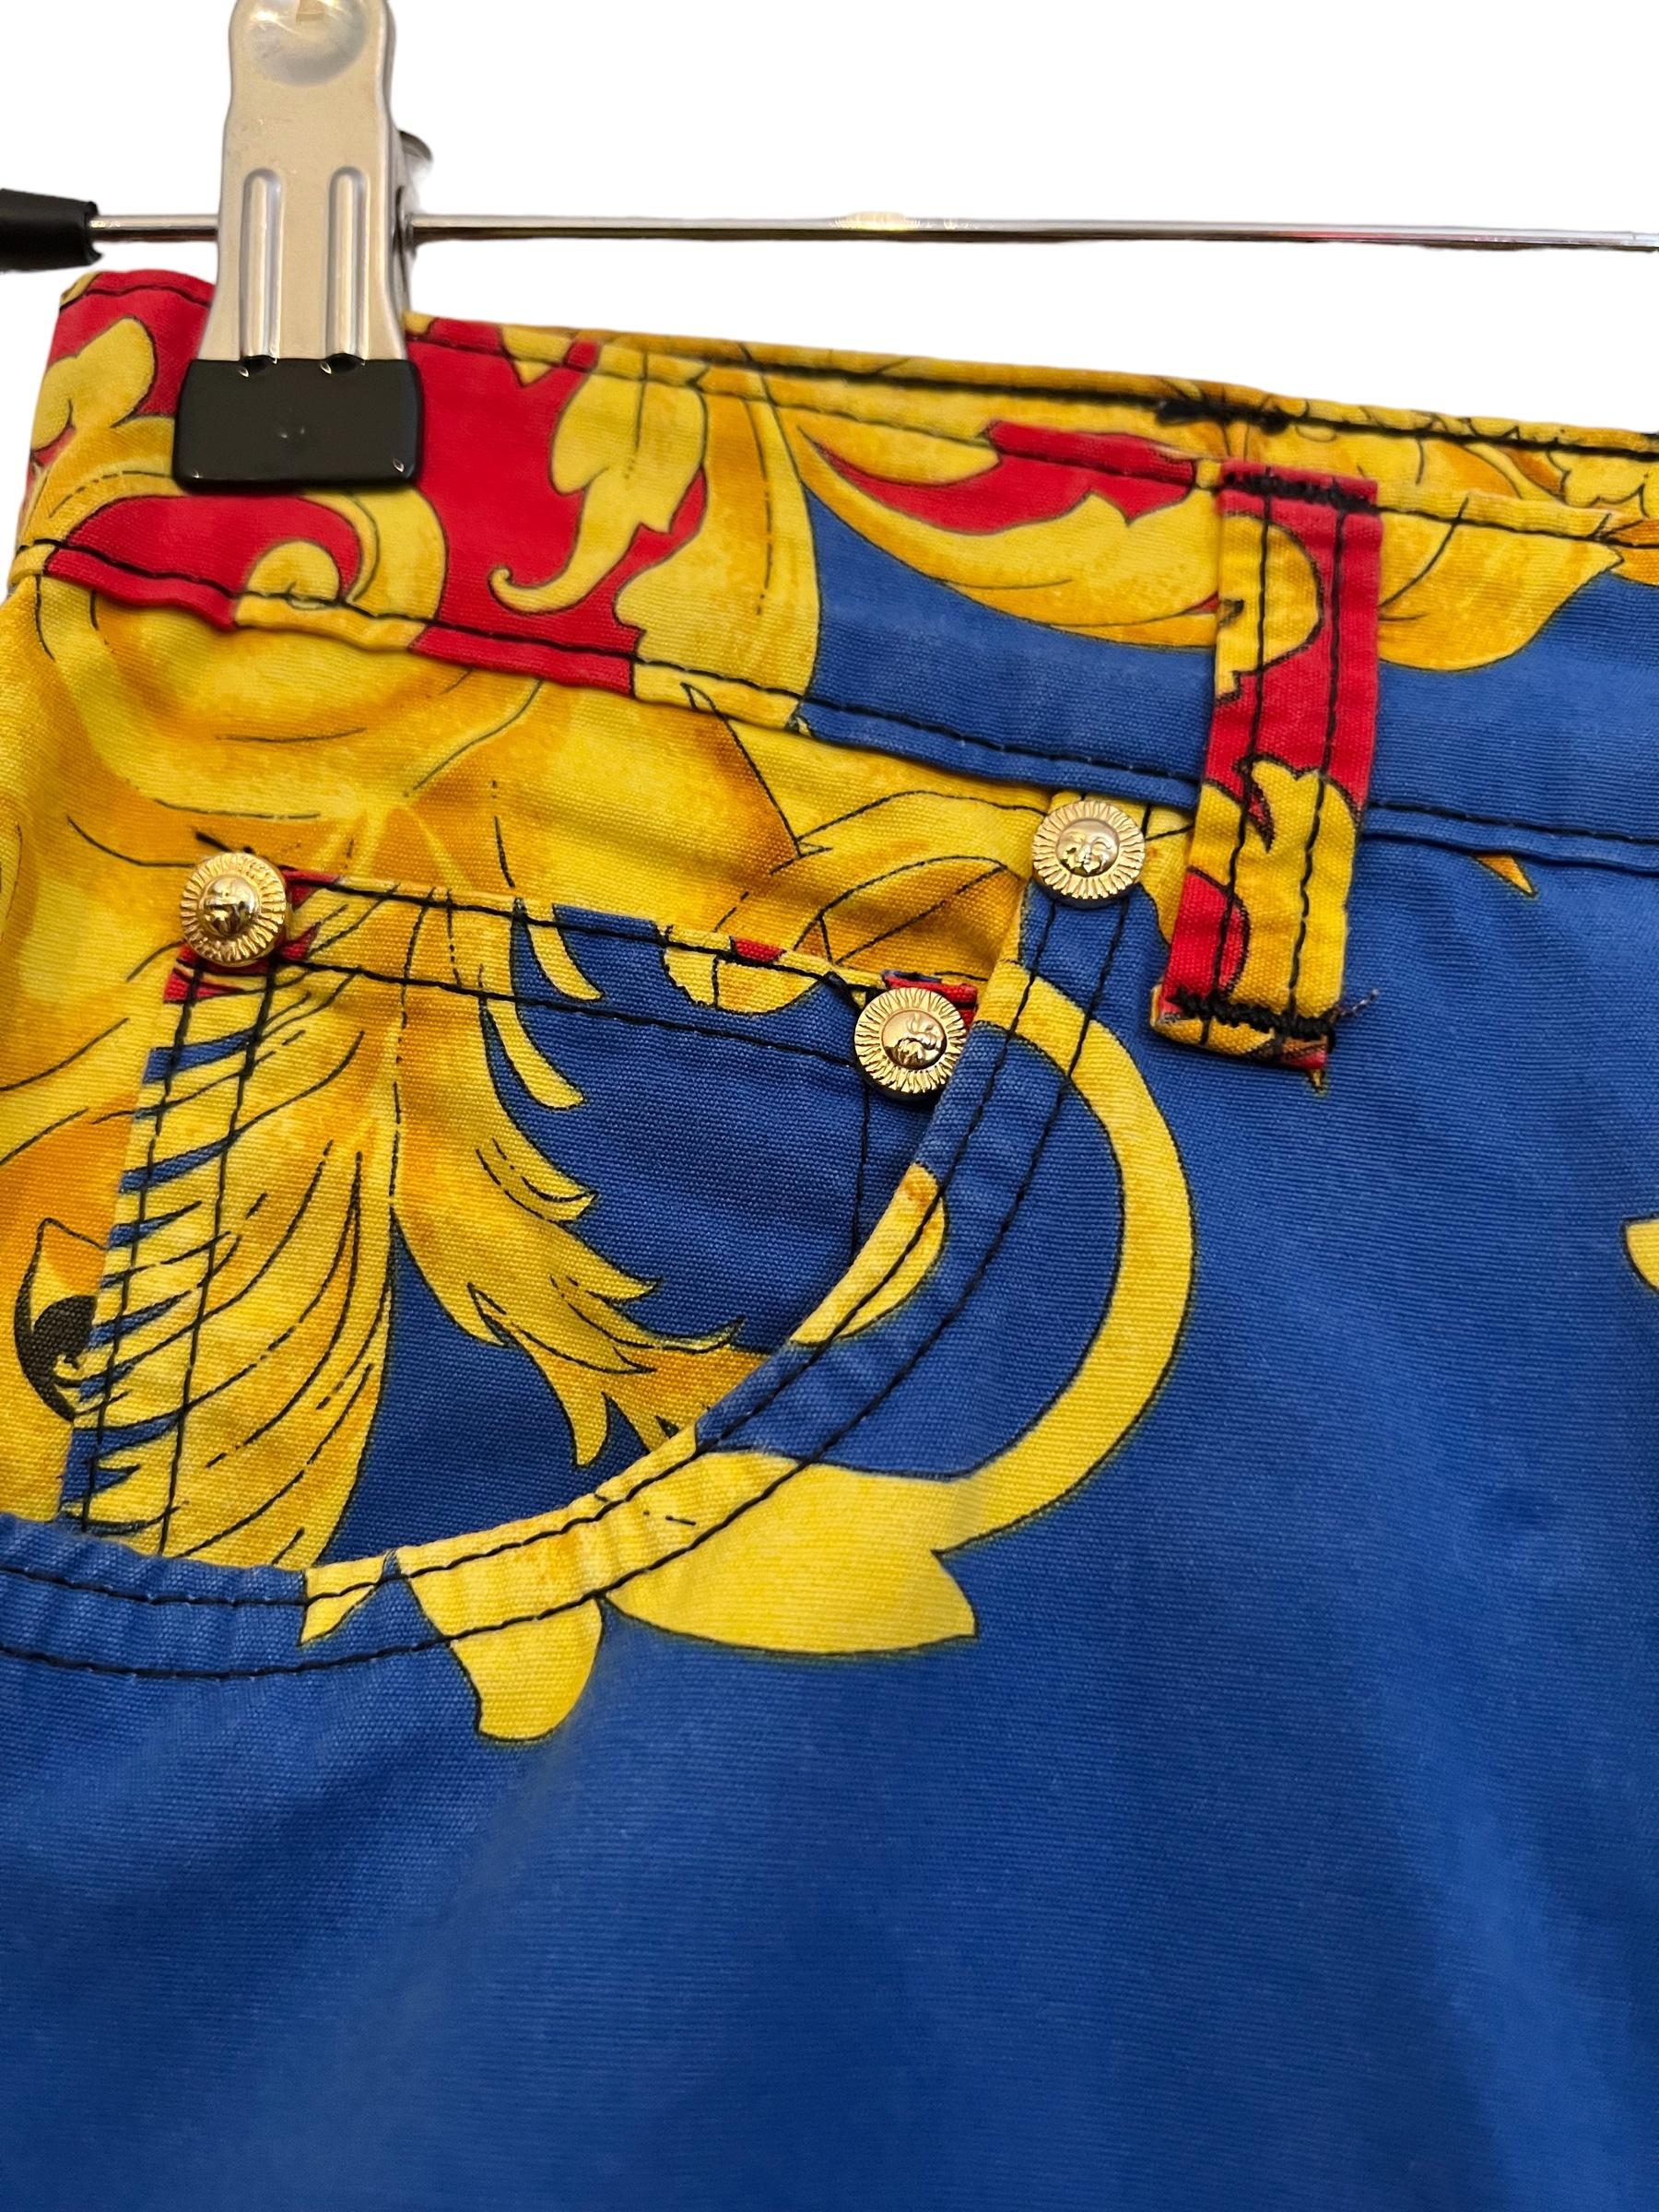 1990's Baroque Gianni Versace High waisted Colourful Rococo patterned Jeans For Sale 4